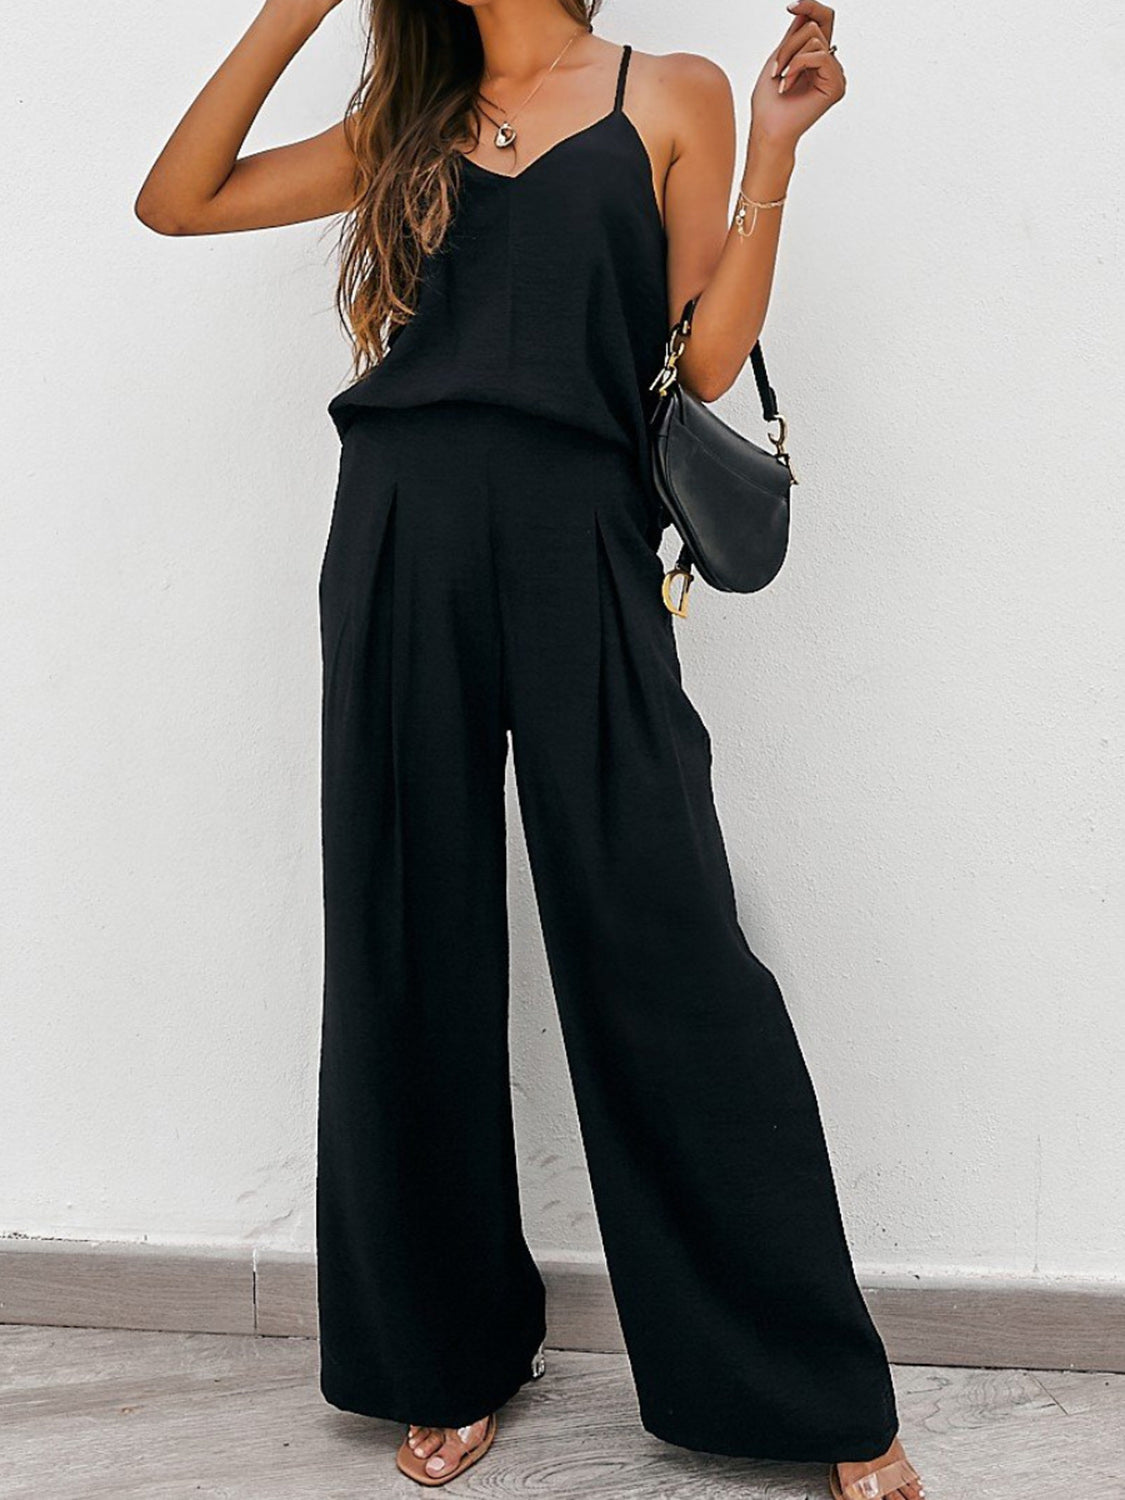 Spaghetti Strap Cami and Wide Leg Pants Set [ click for additional color options]